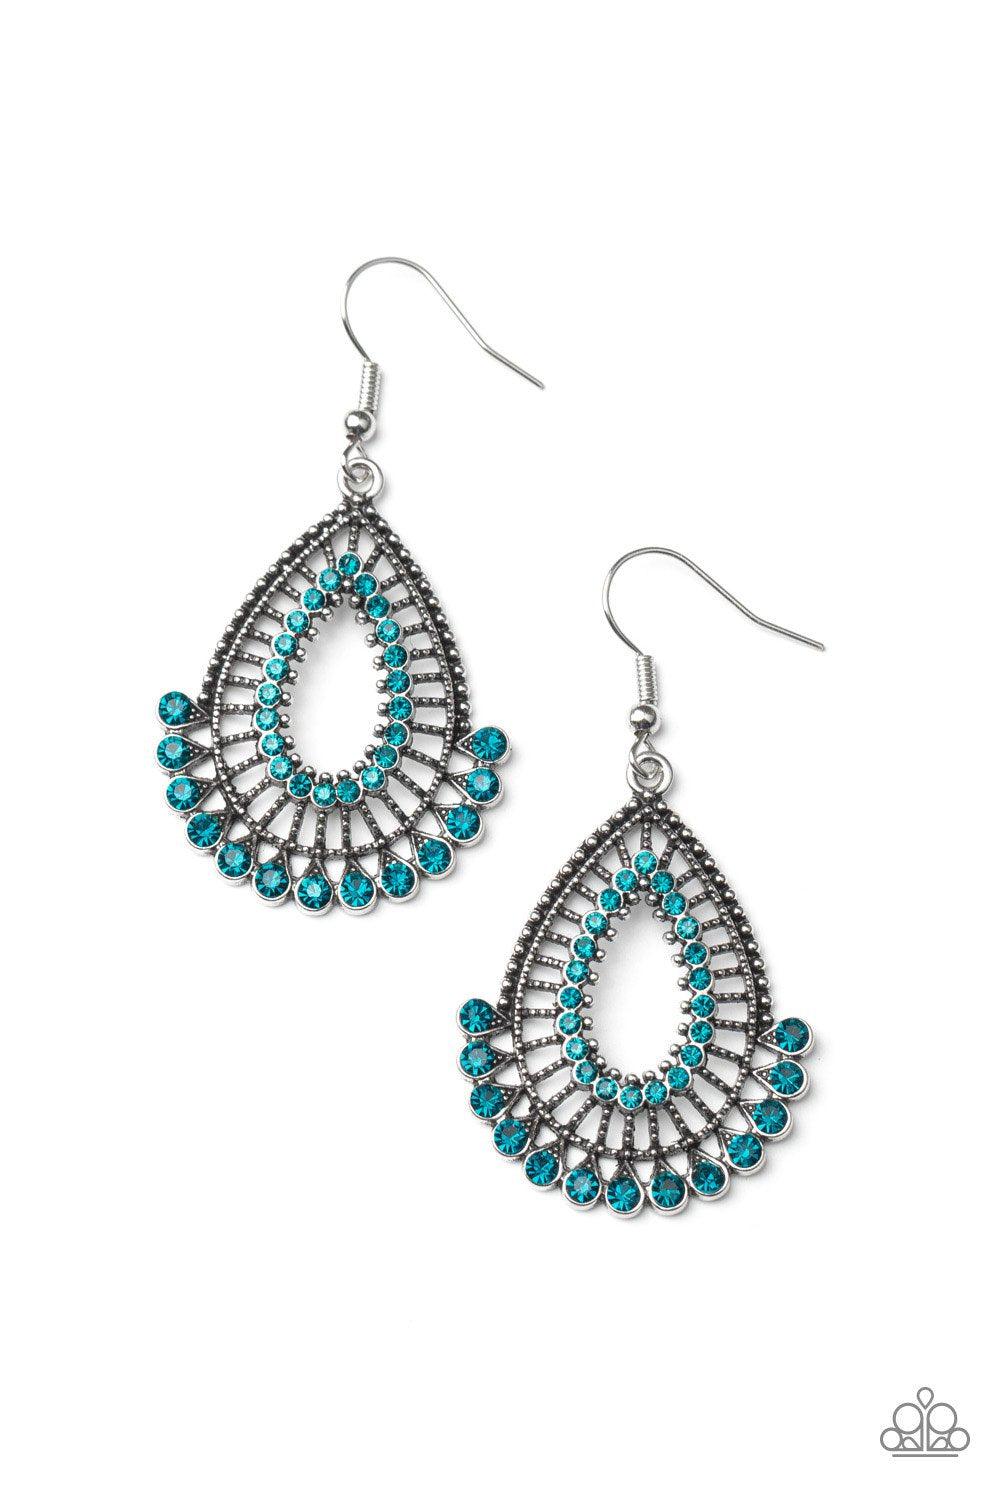 Castle Collection Blue Rhinestone Earrings - Paparazzi Accessories - lightbox -CarasShop.com - $5 Jewelry by Cara Jewels